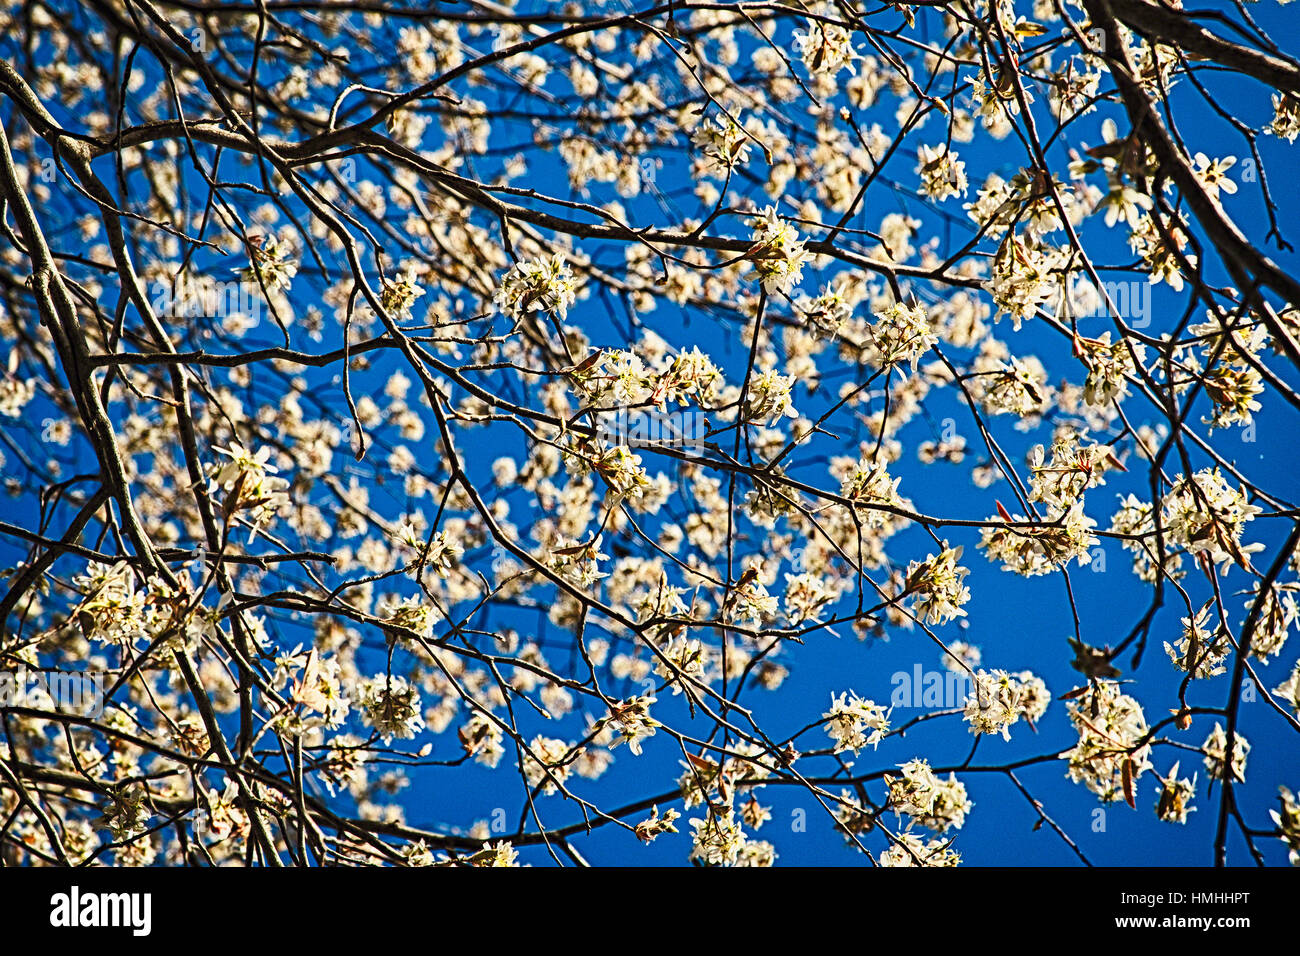 Flowering Tree Branches Against Blue Sky Stock Photo